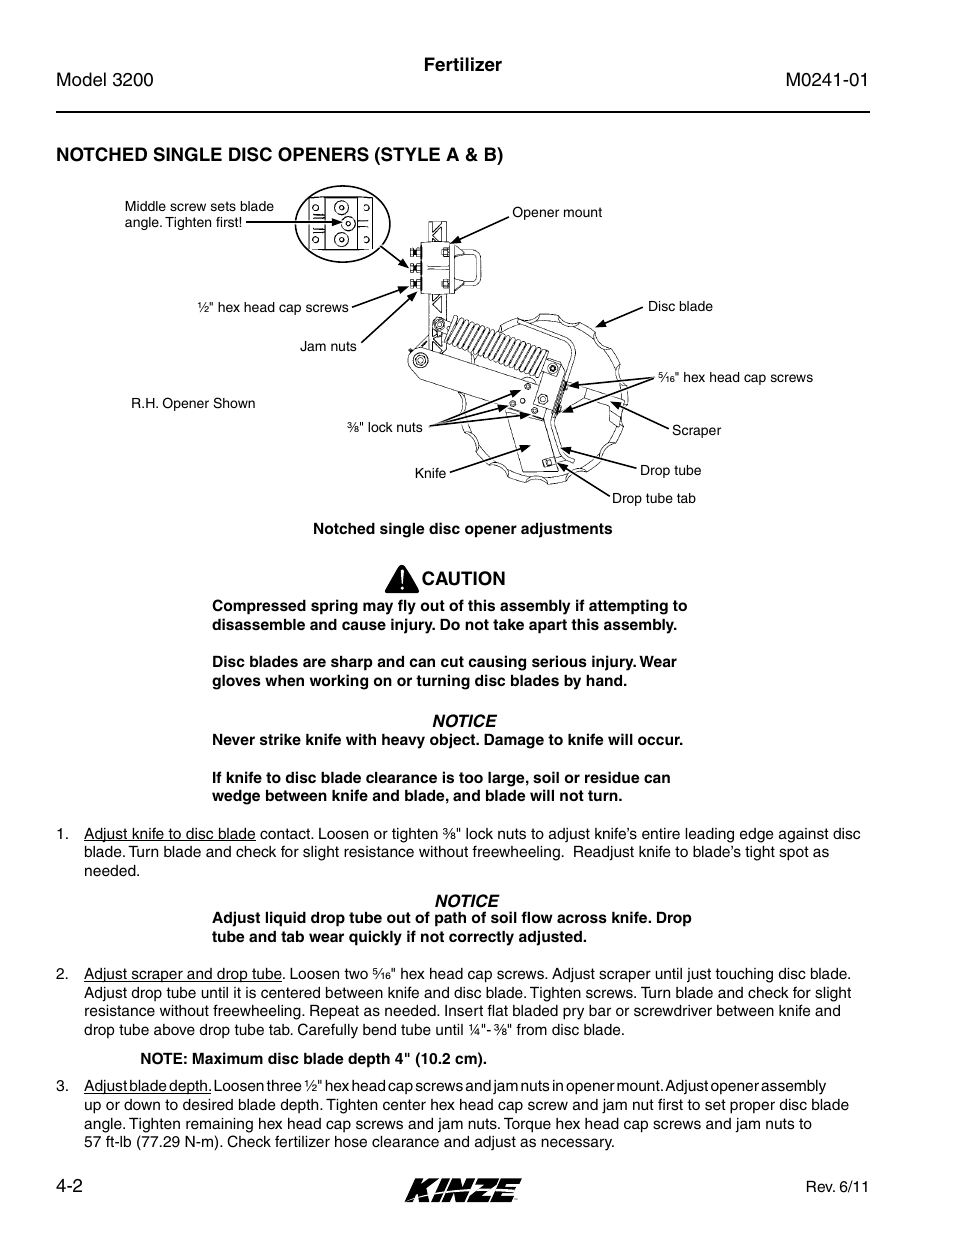 Notched single disc openers (style a & b), Notched single disc openers (style a & b) -2 | Kinze 3200 Wing-Fold Planter Rev. 7/14 User Manual | Page 60 / 192